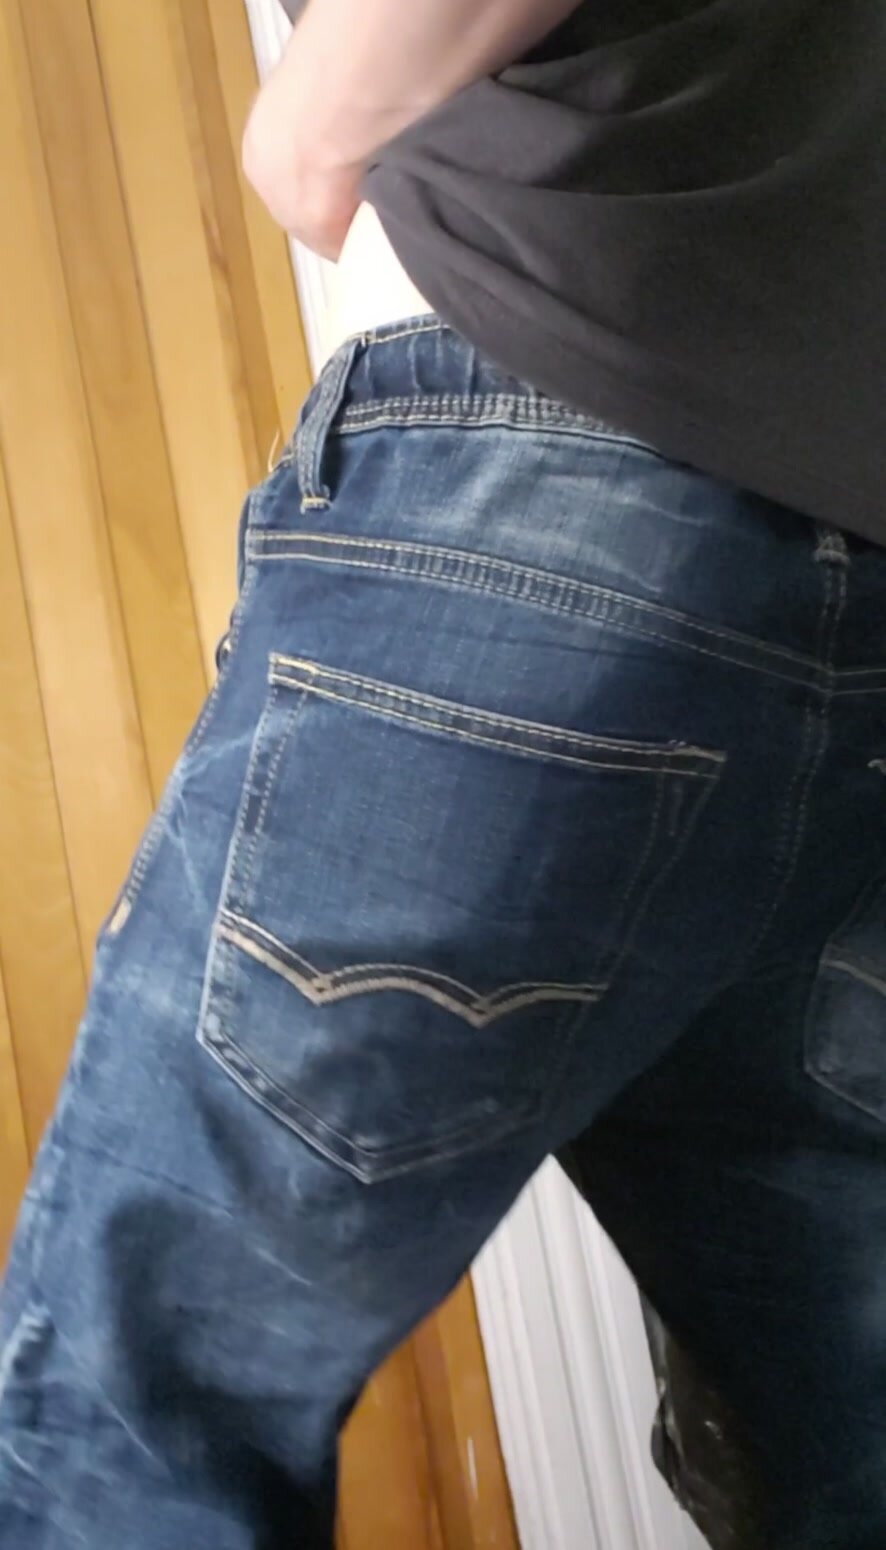 Rewetting Jeans - video 4